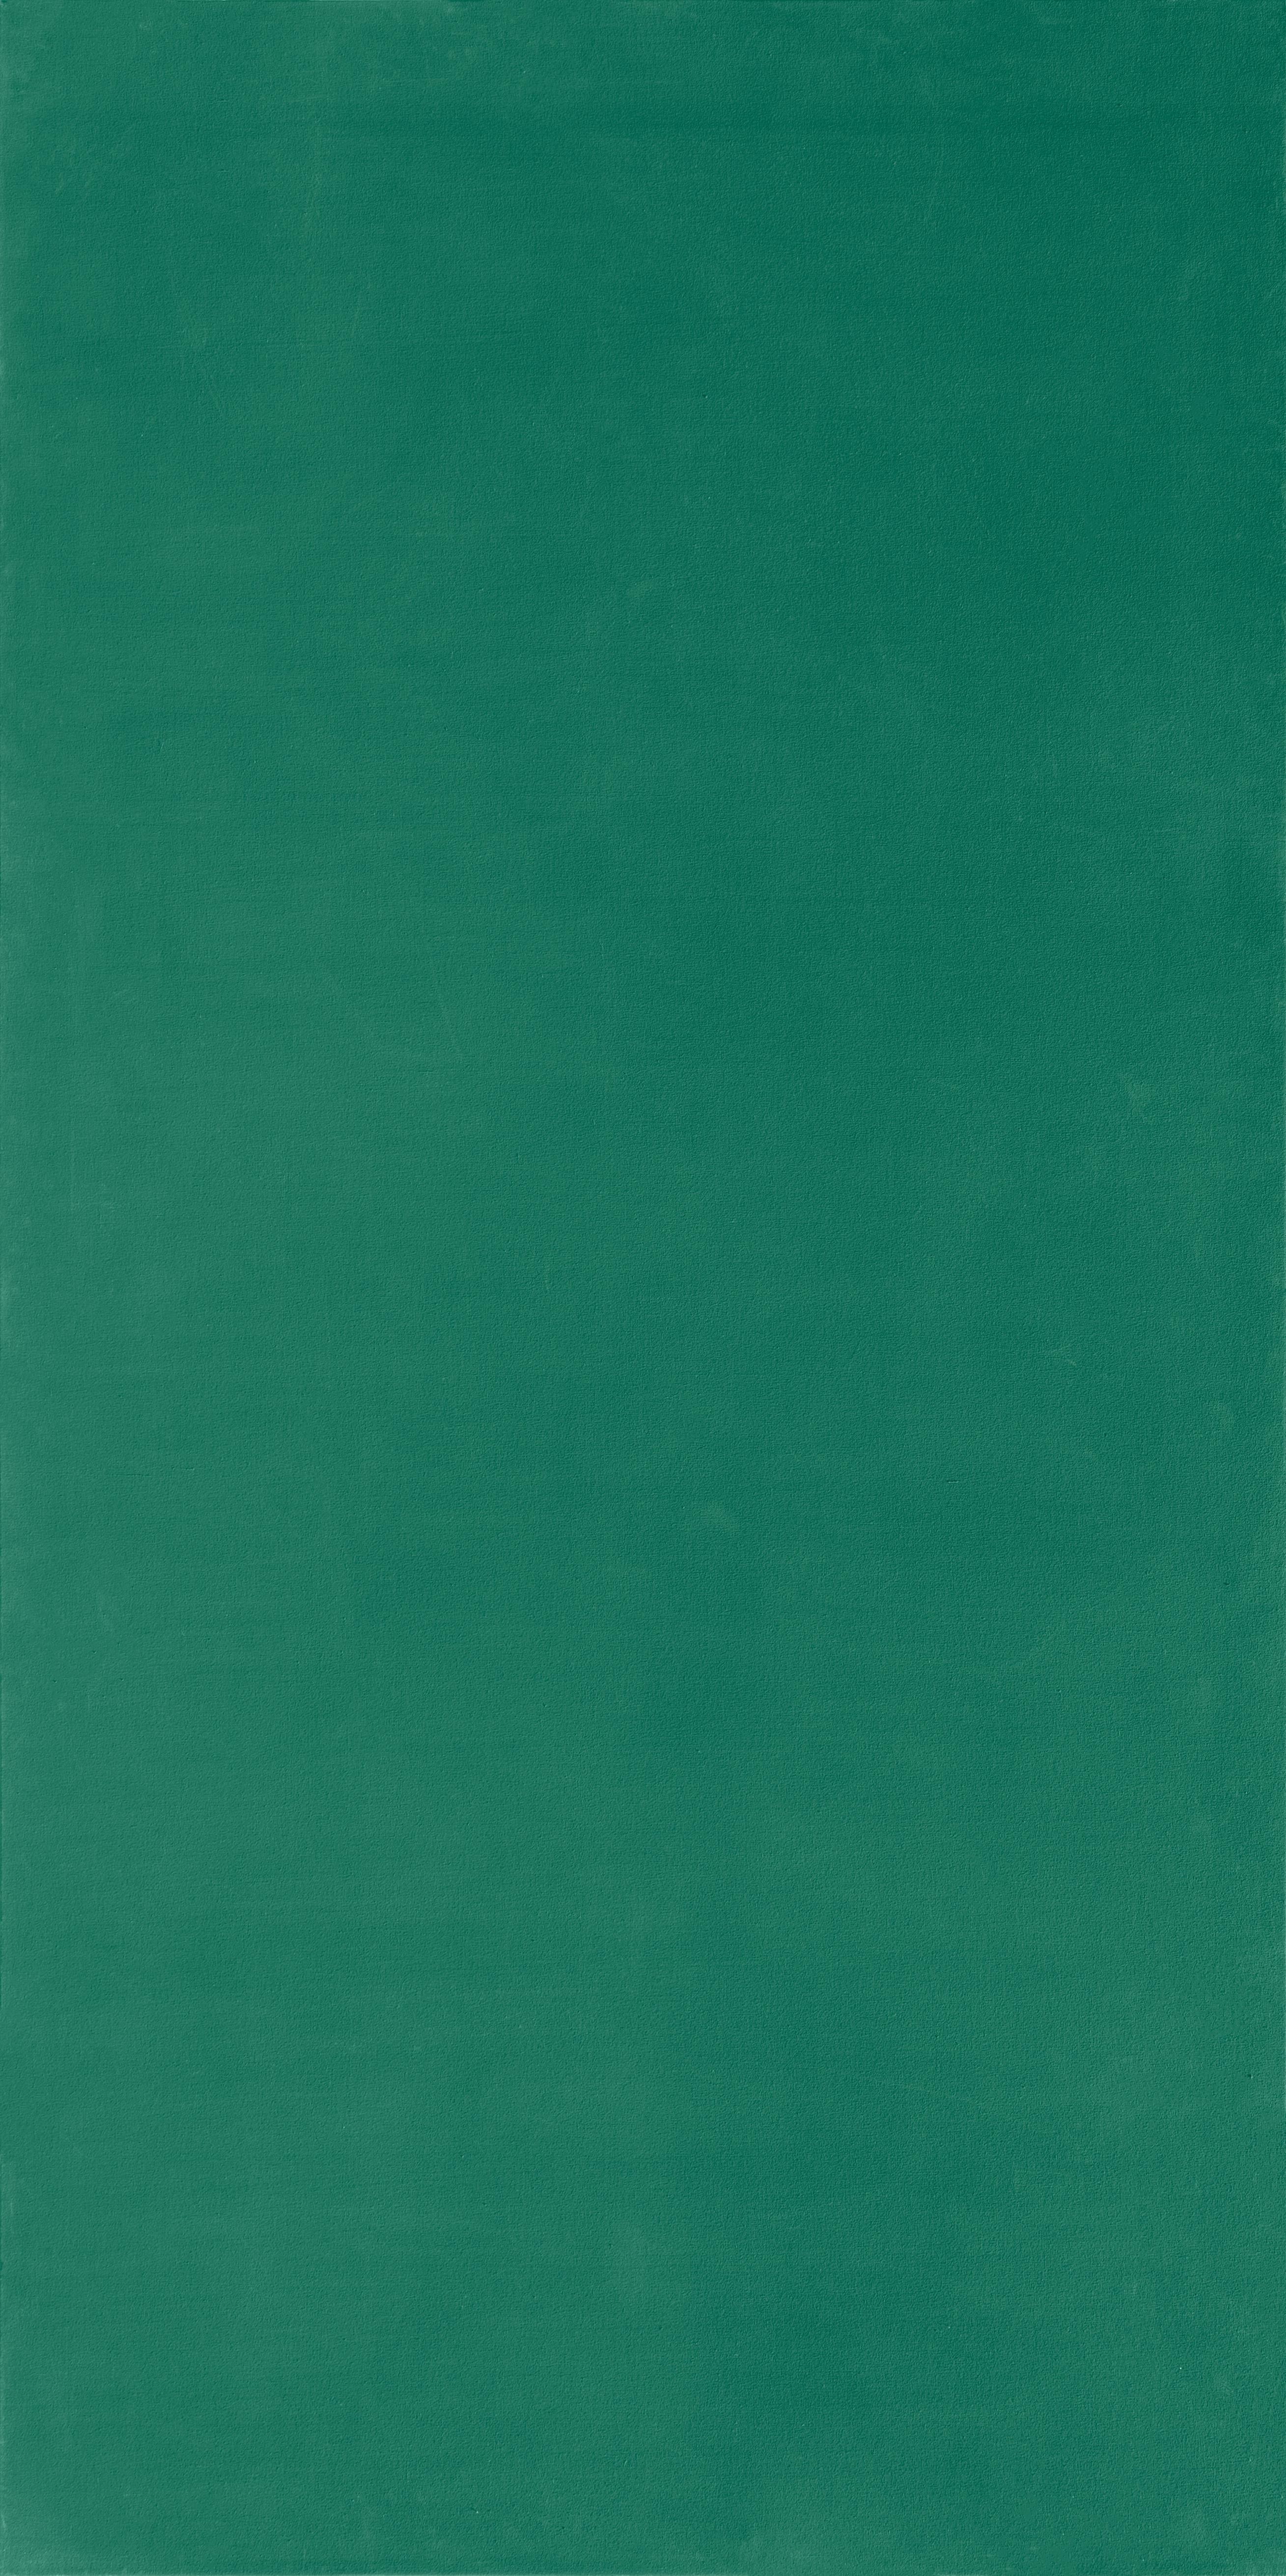 Large scale monochrome painting by Olivier Mosset in a deep green color. Mosset became interested in monochrome works in the late 1970s, at the height of Neo-Expressionism.

Canvas Size: 110 x 55 inches